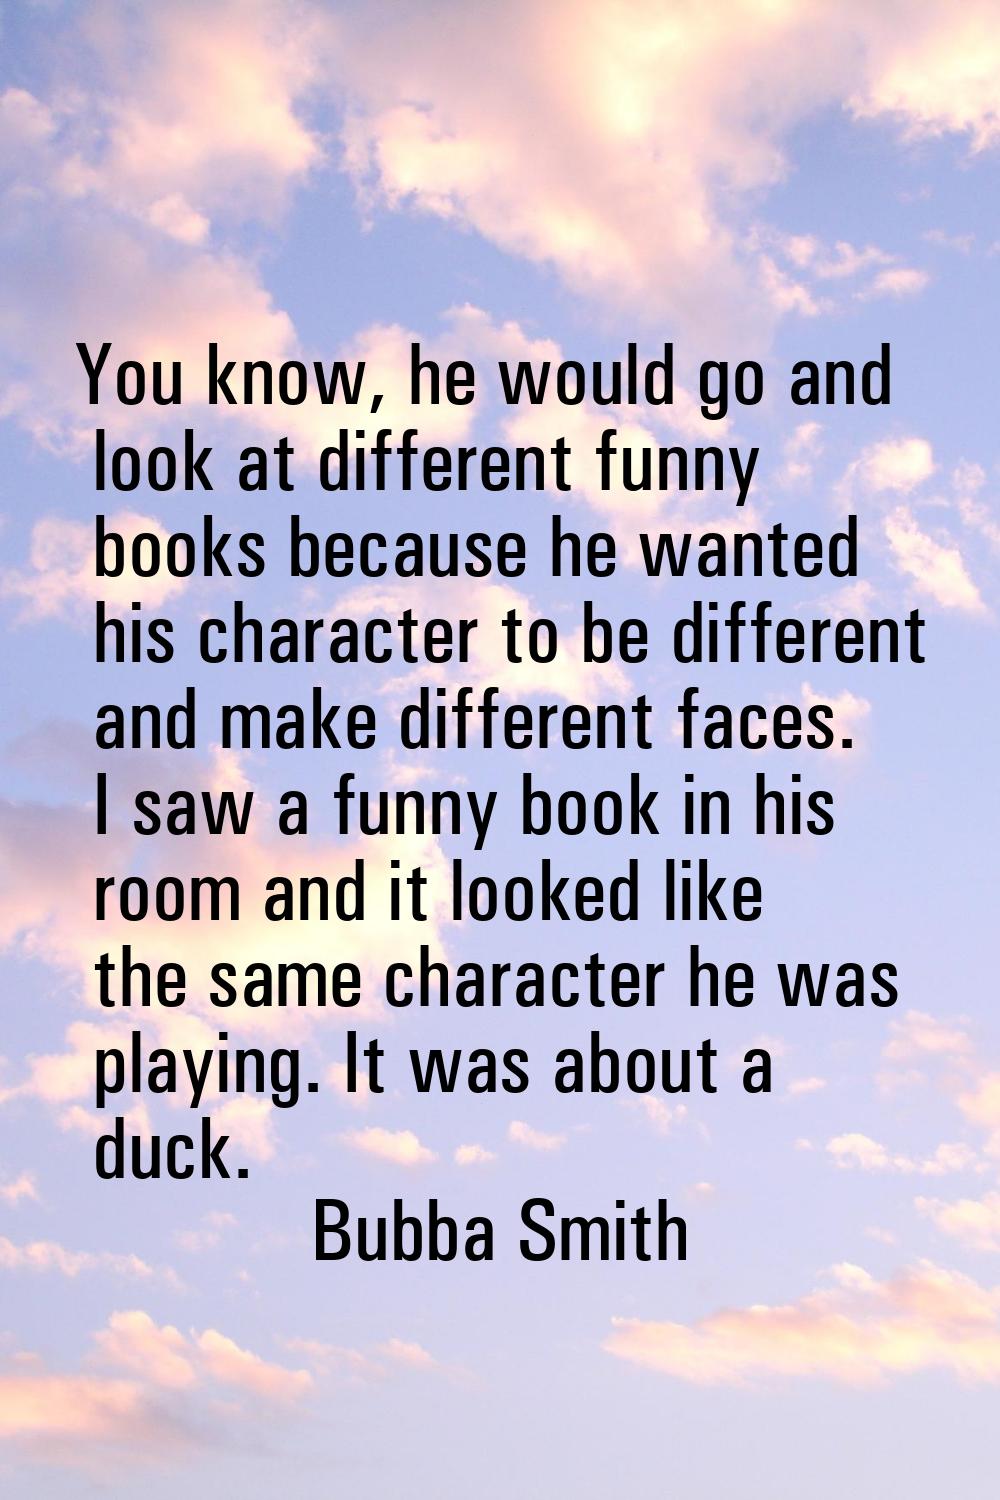 You know, he would go and look at different funny books because he wanted his character to be diffe